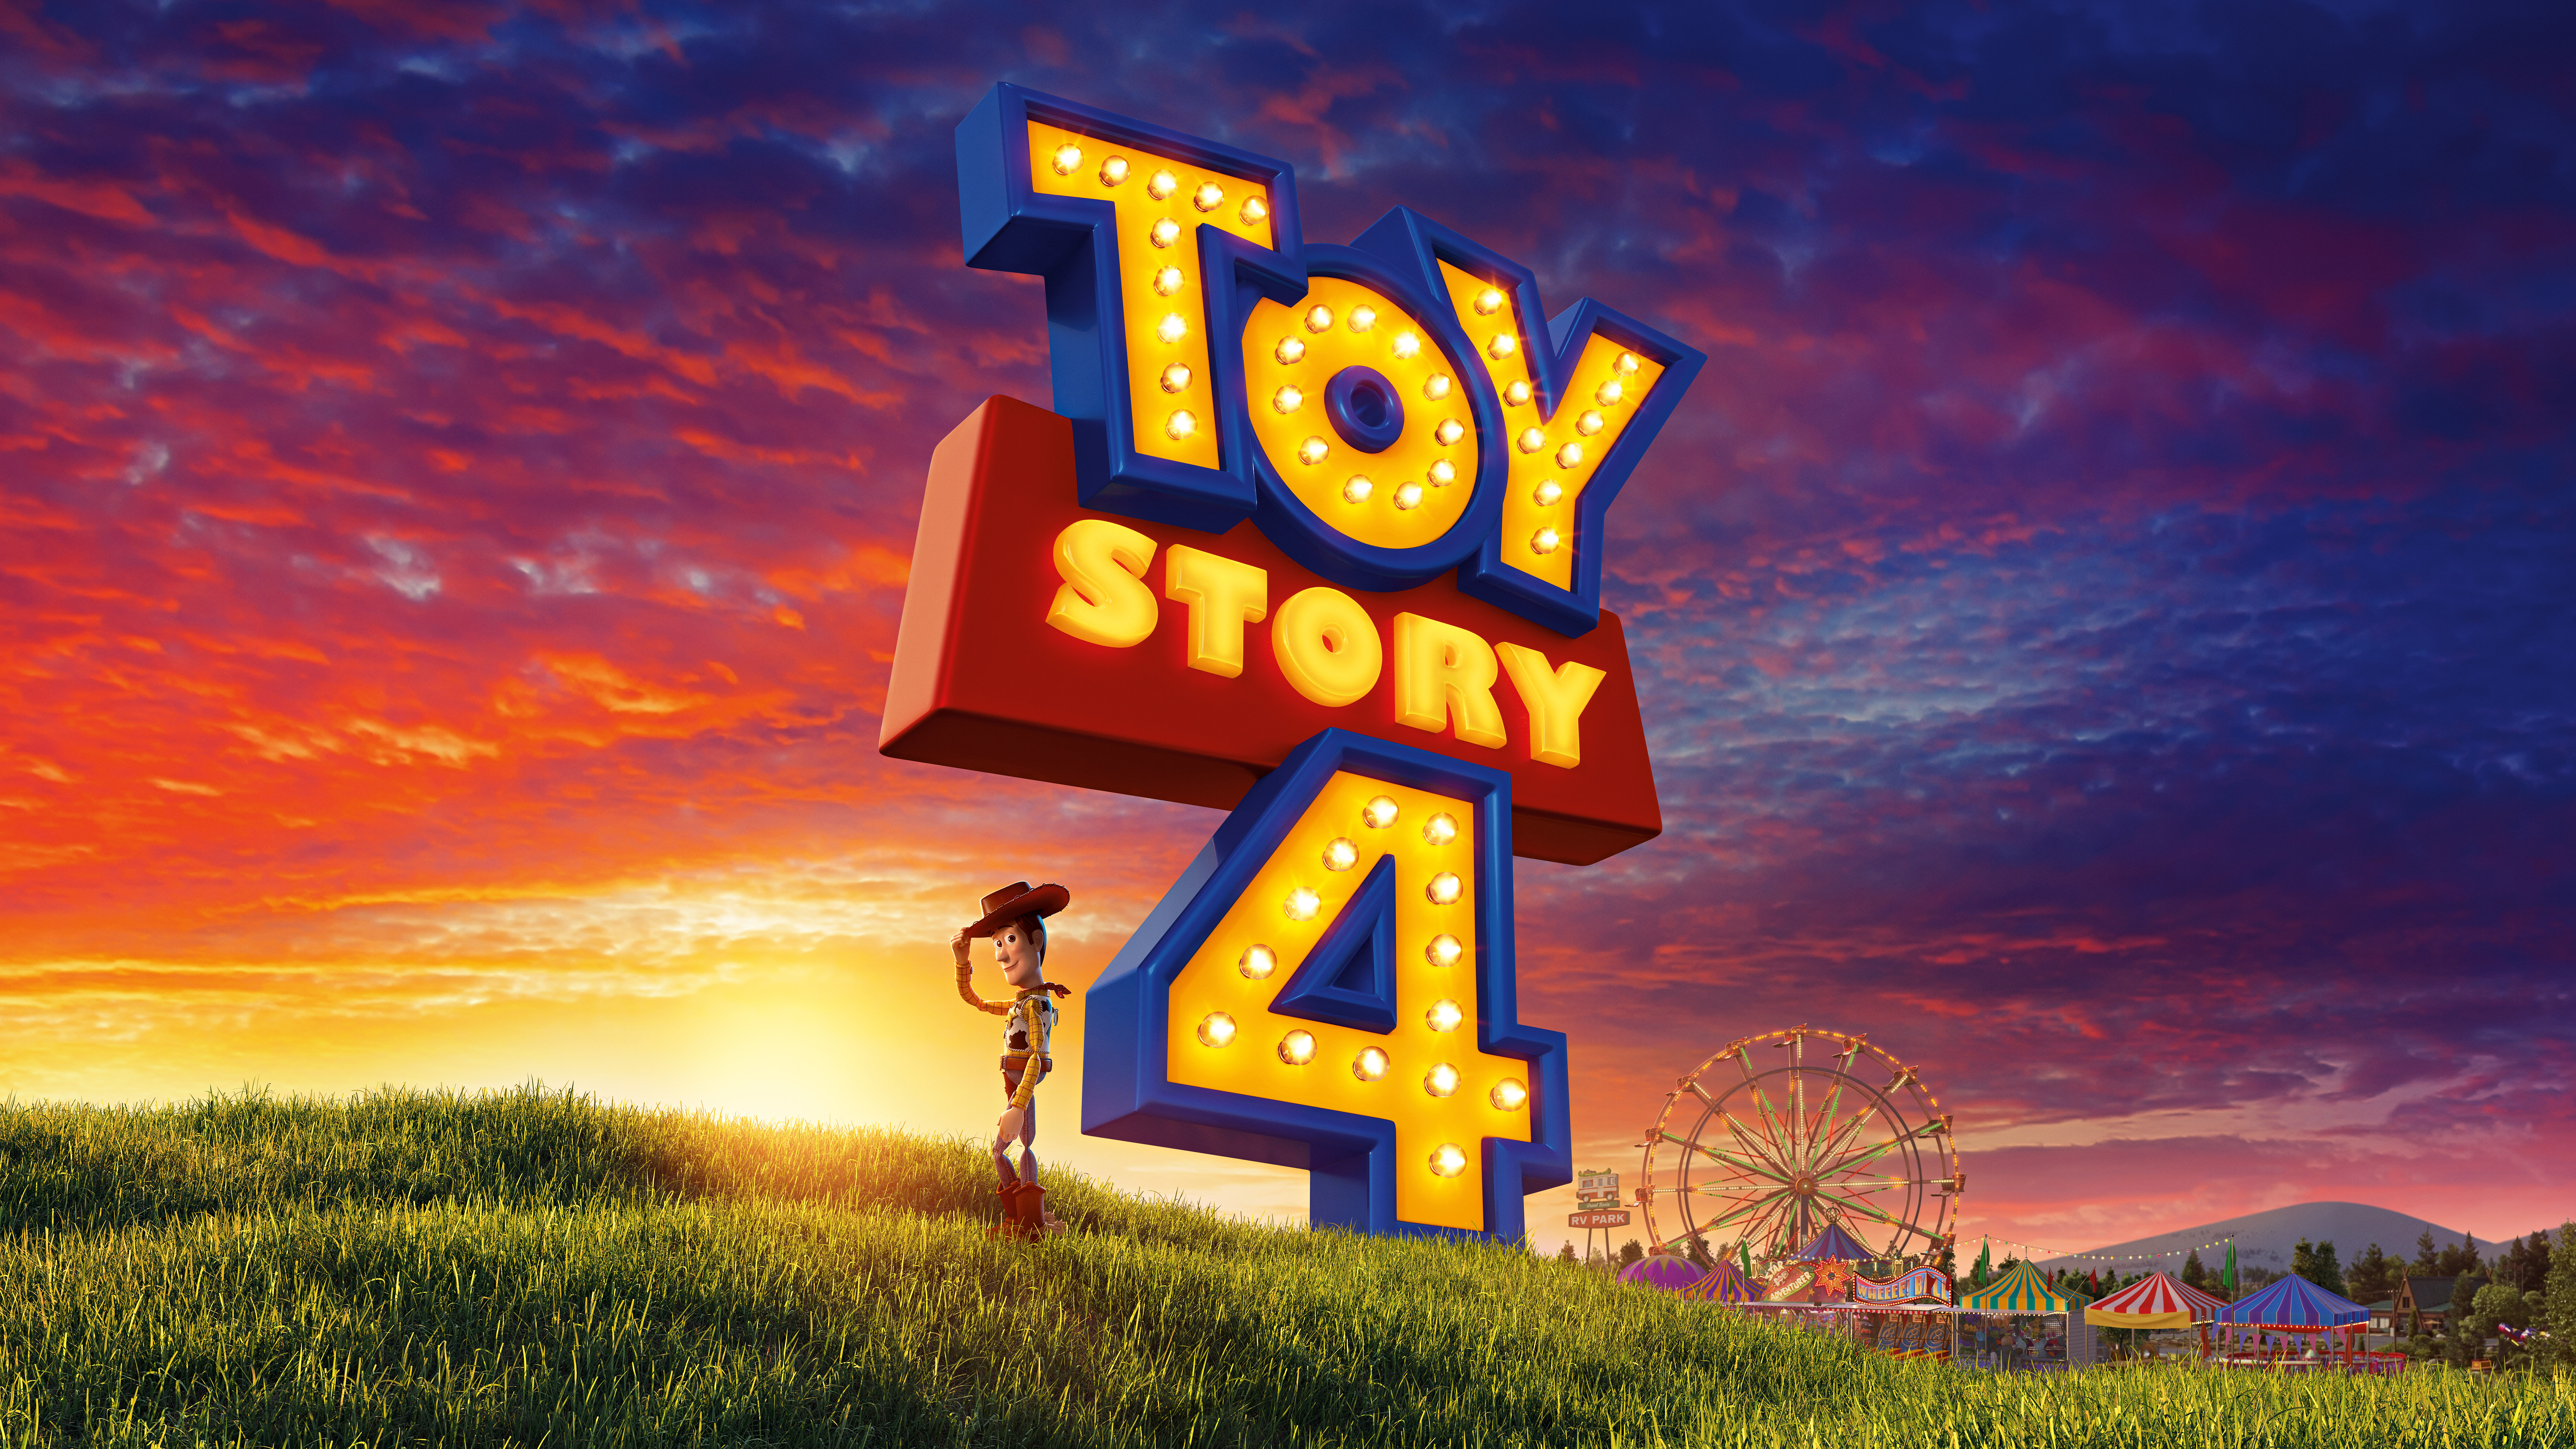 Toy Story 4 Woody 4k 8k - Toy Story 4 Banner - HD Wallpaper 